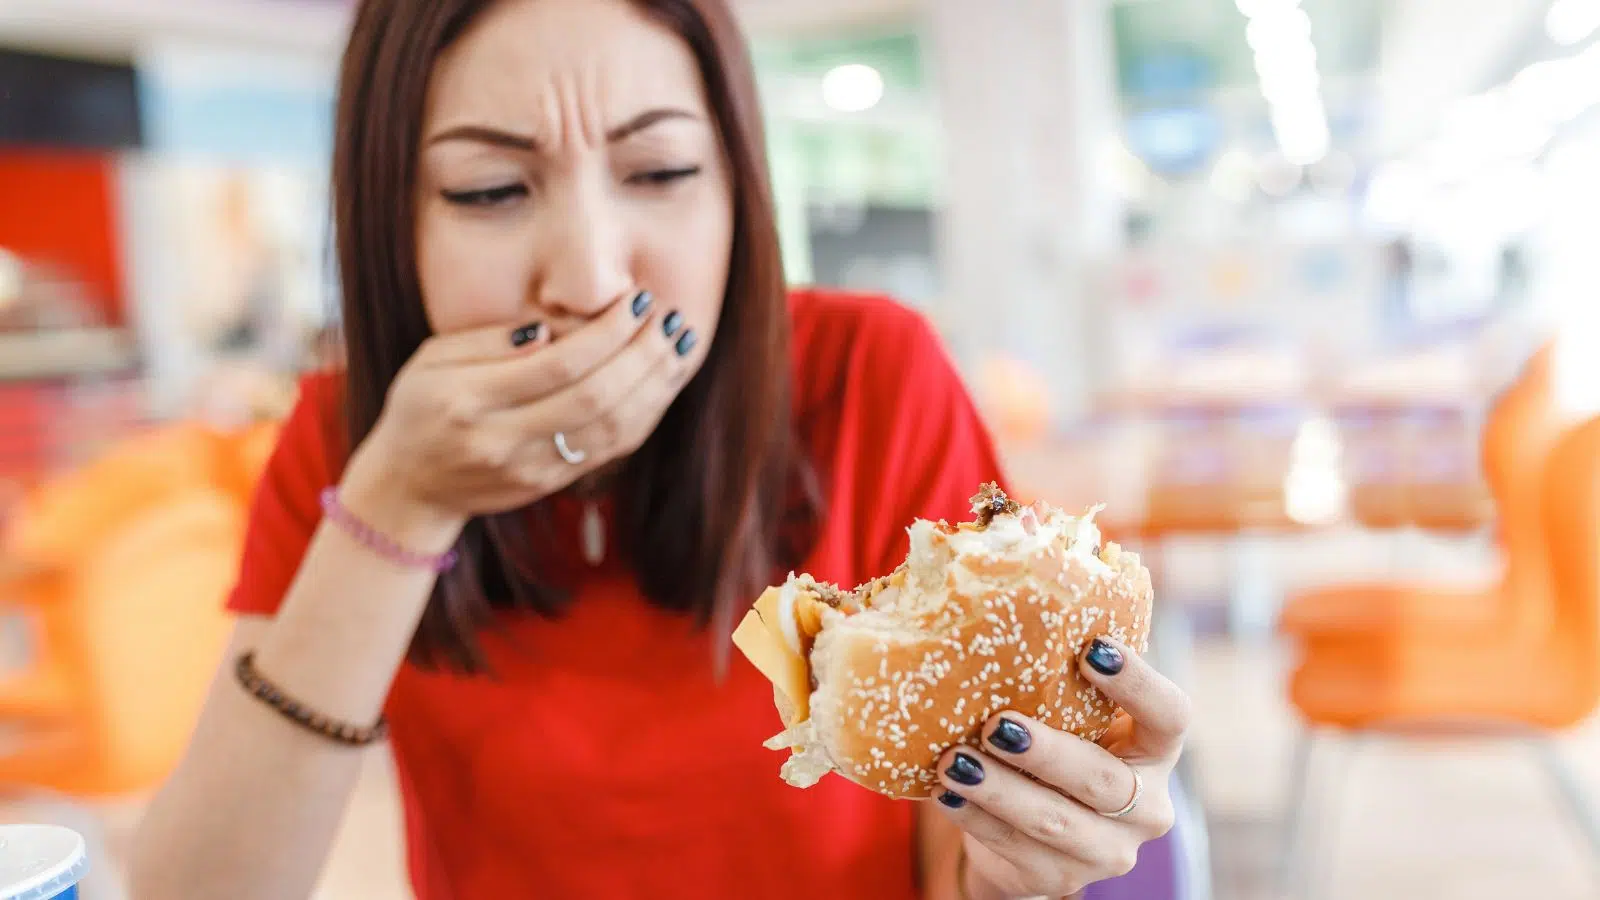 How to ruin a burger, by lifestyle blogger What the Fab